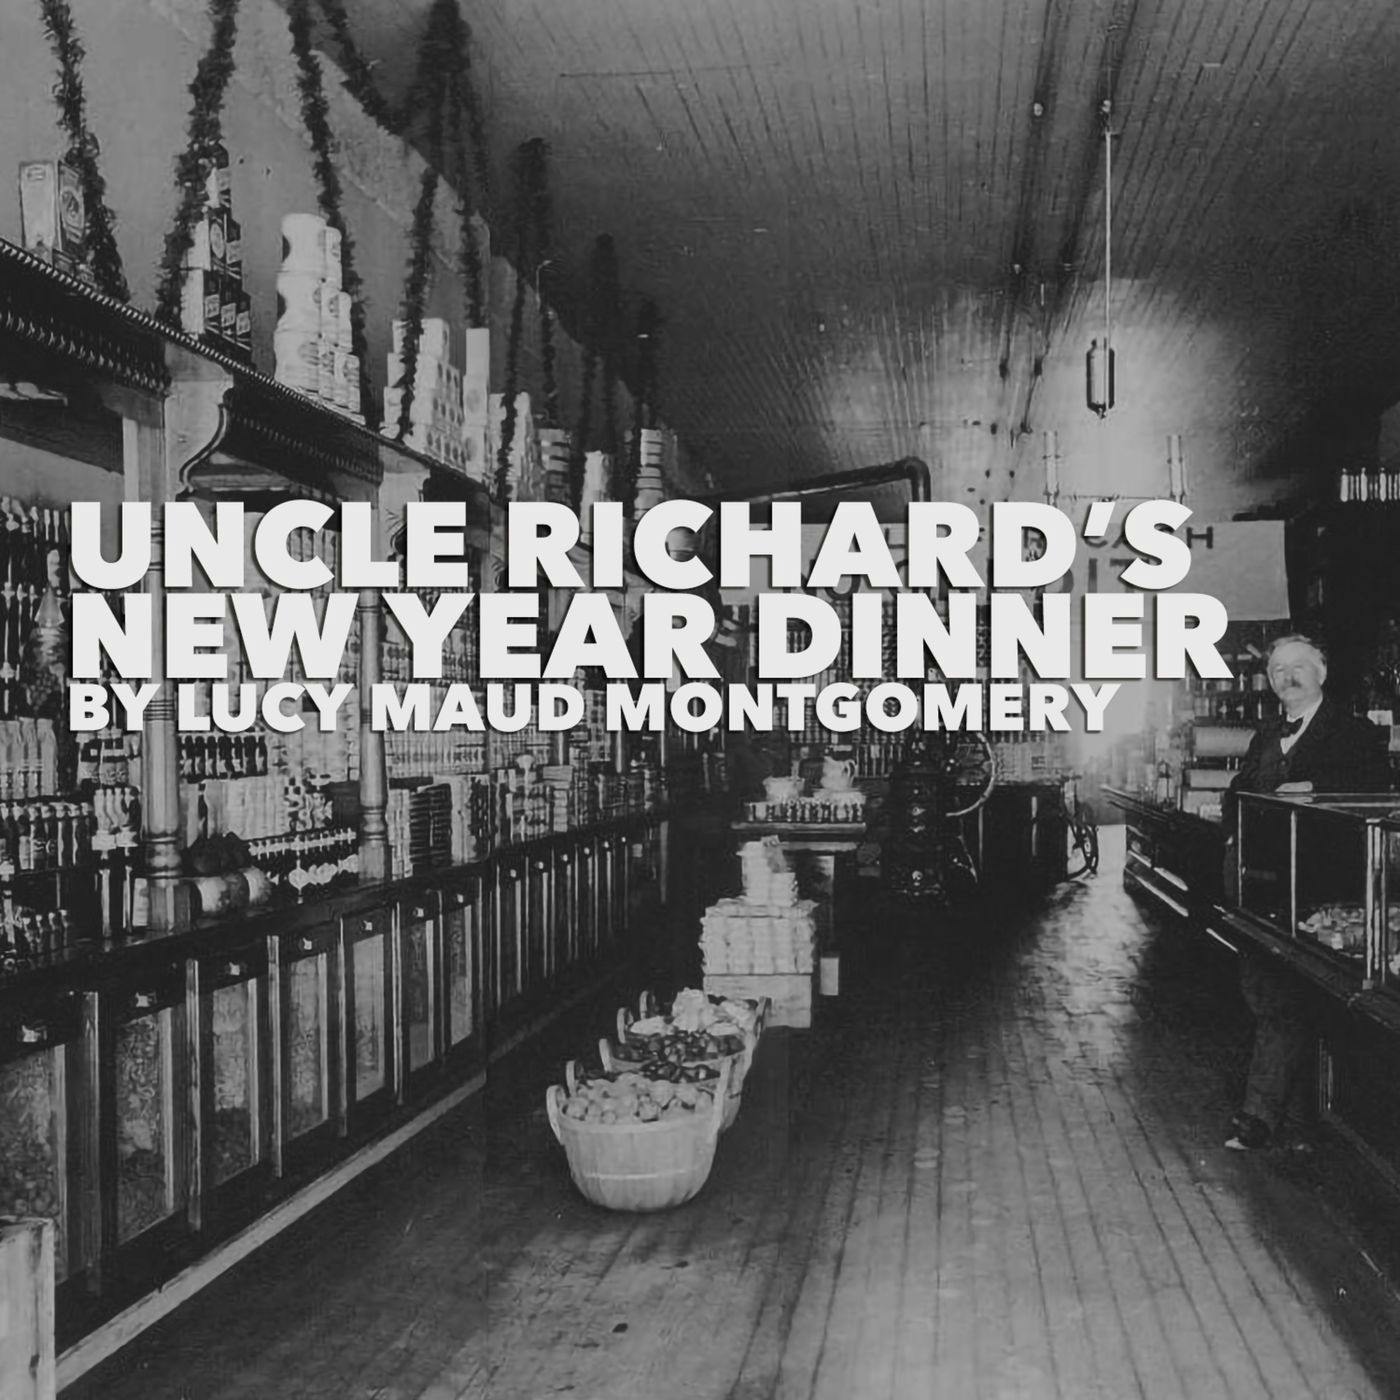 Uncle Richard's New Year Dinner by Lucy Maud Montgomery